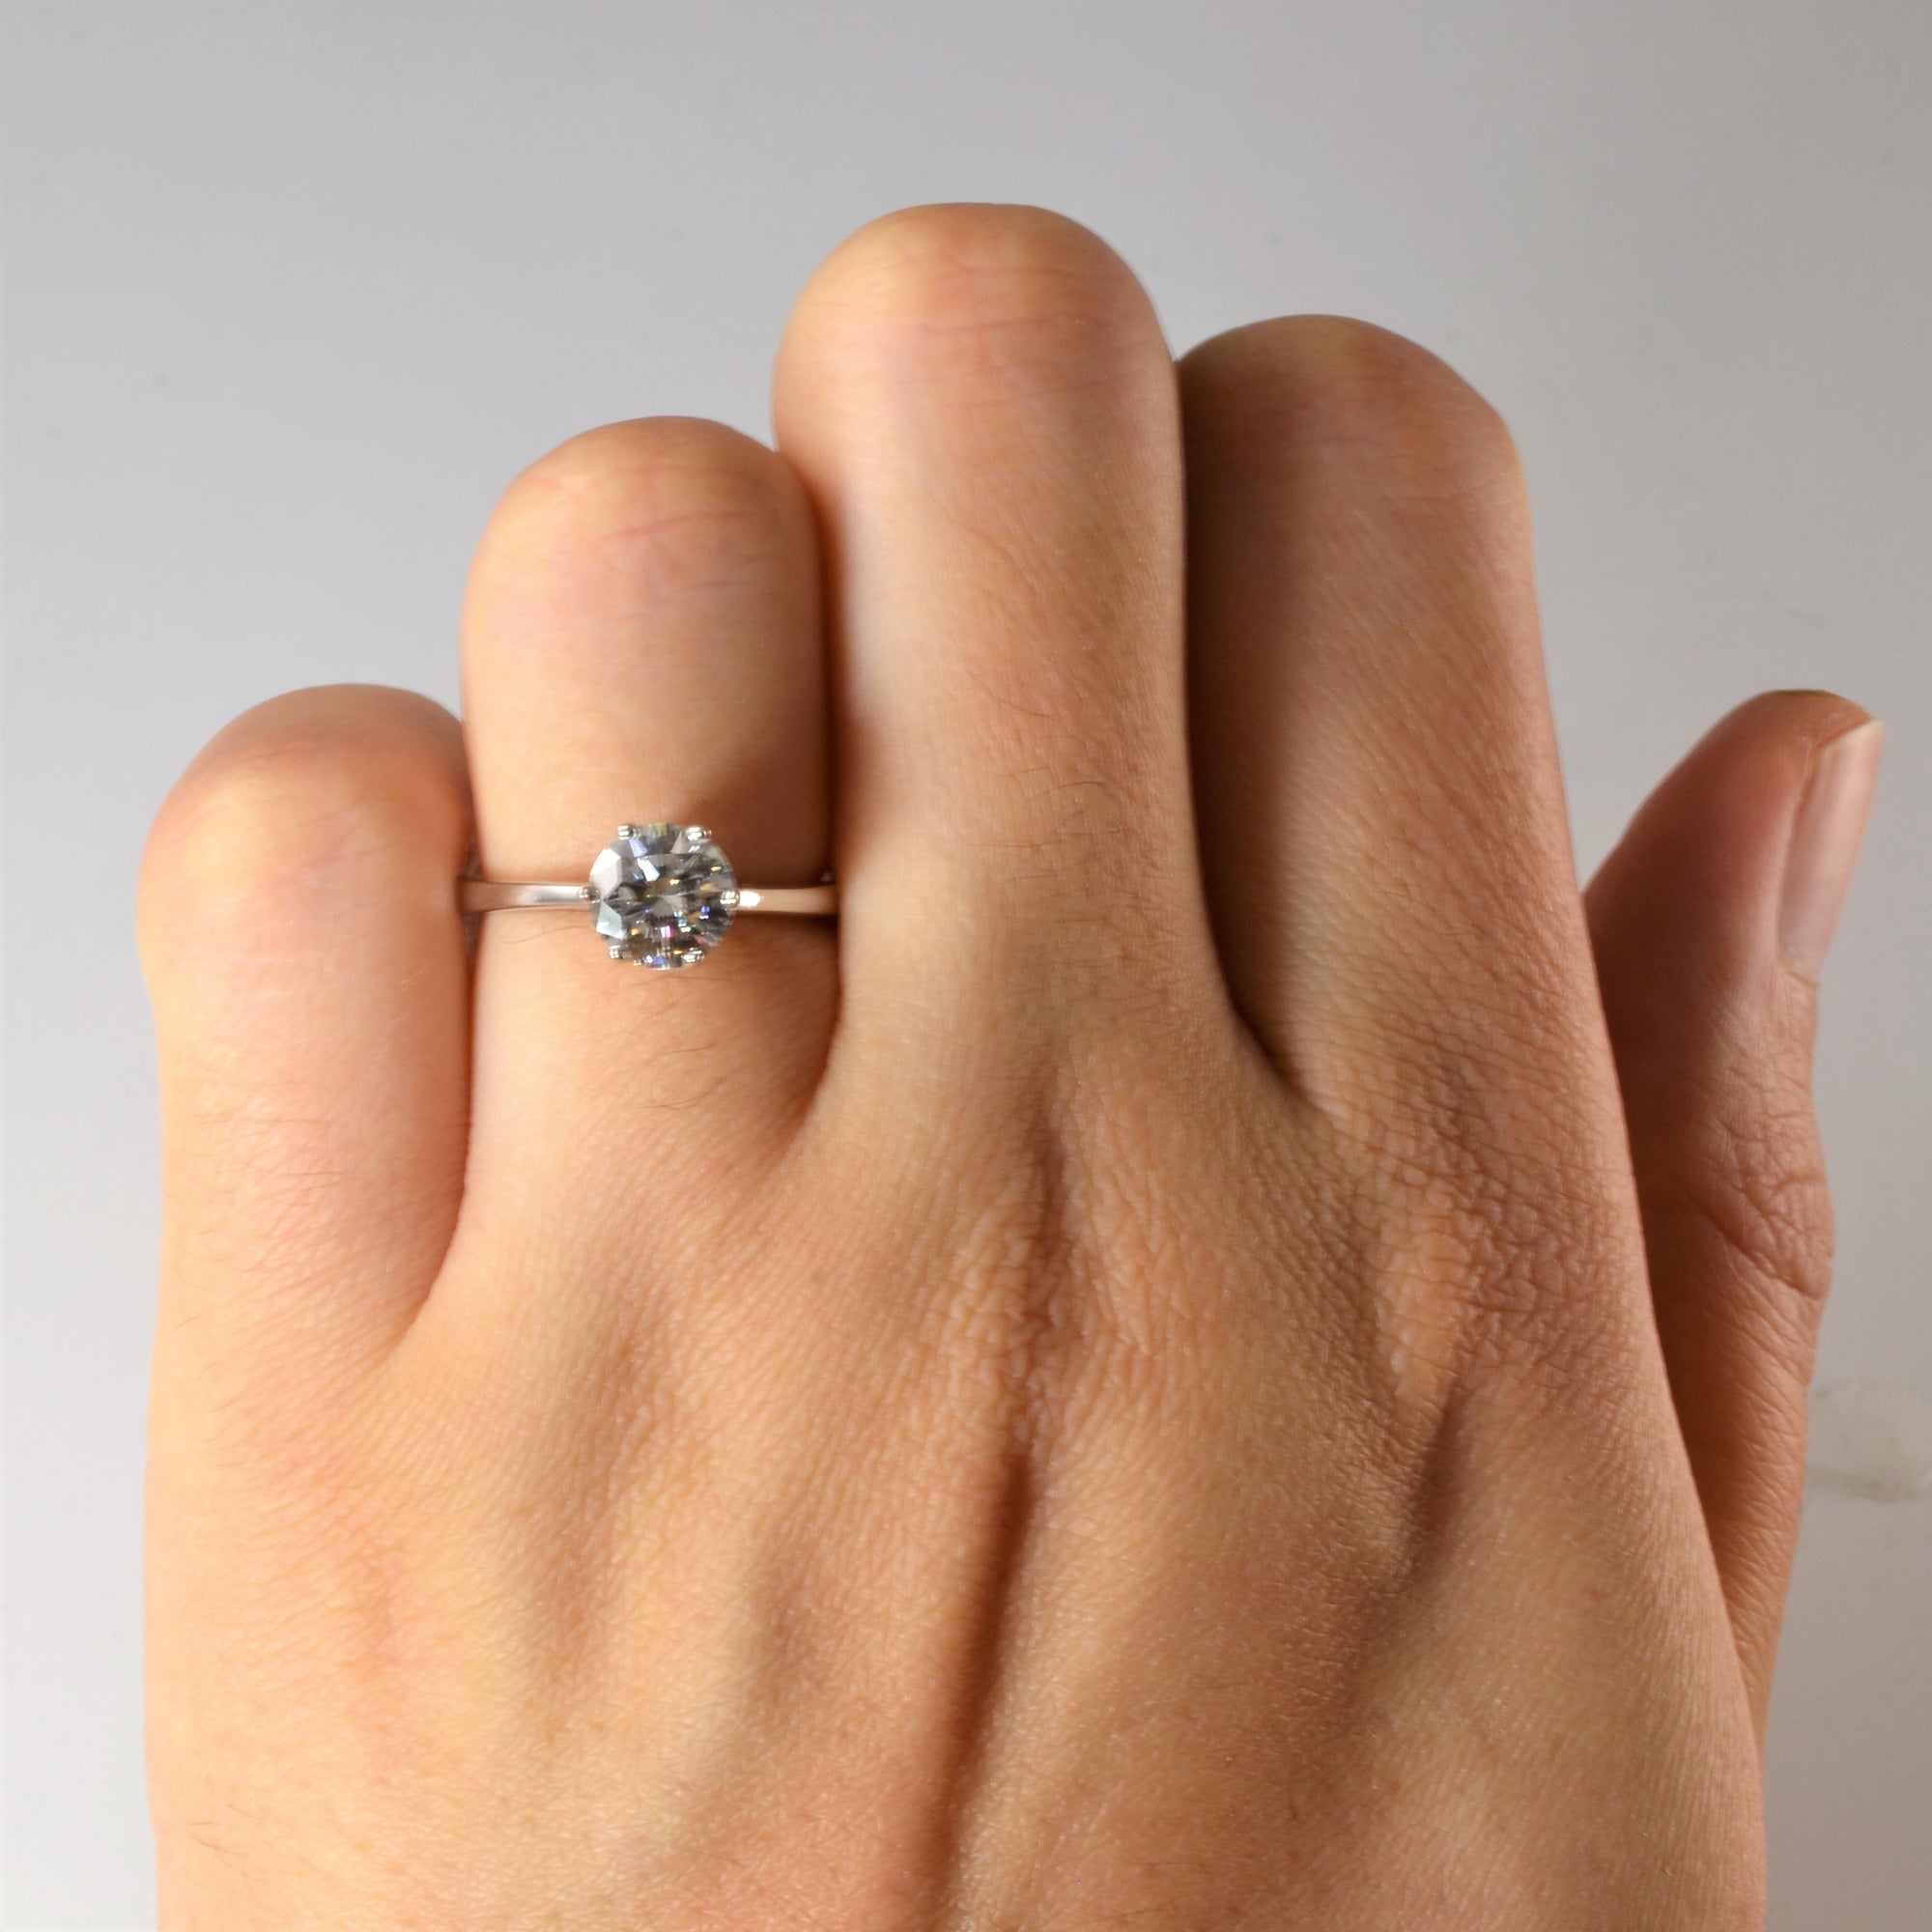 Six Prong Solitaire Diamond Engagement Ring | 1.00ct | SZ 4.75 |